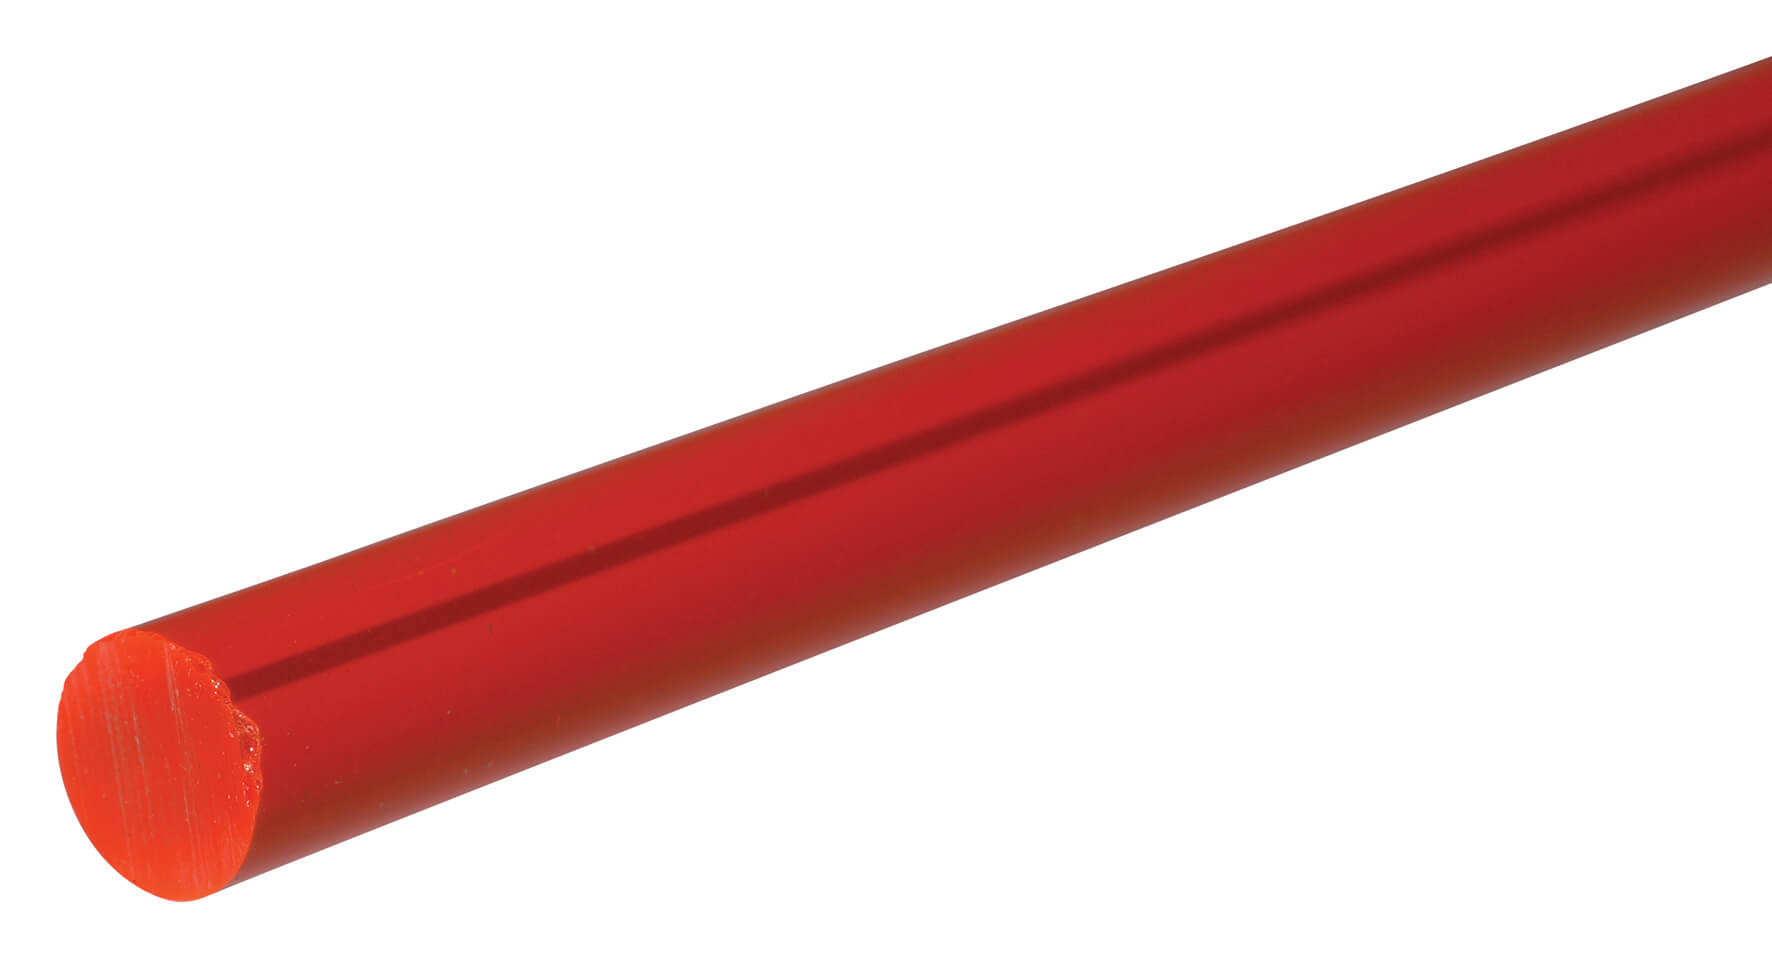 Fluorescent Acrylic Rod 4mm x 500mm - Red